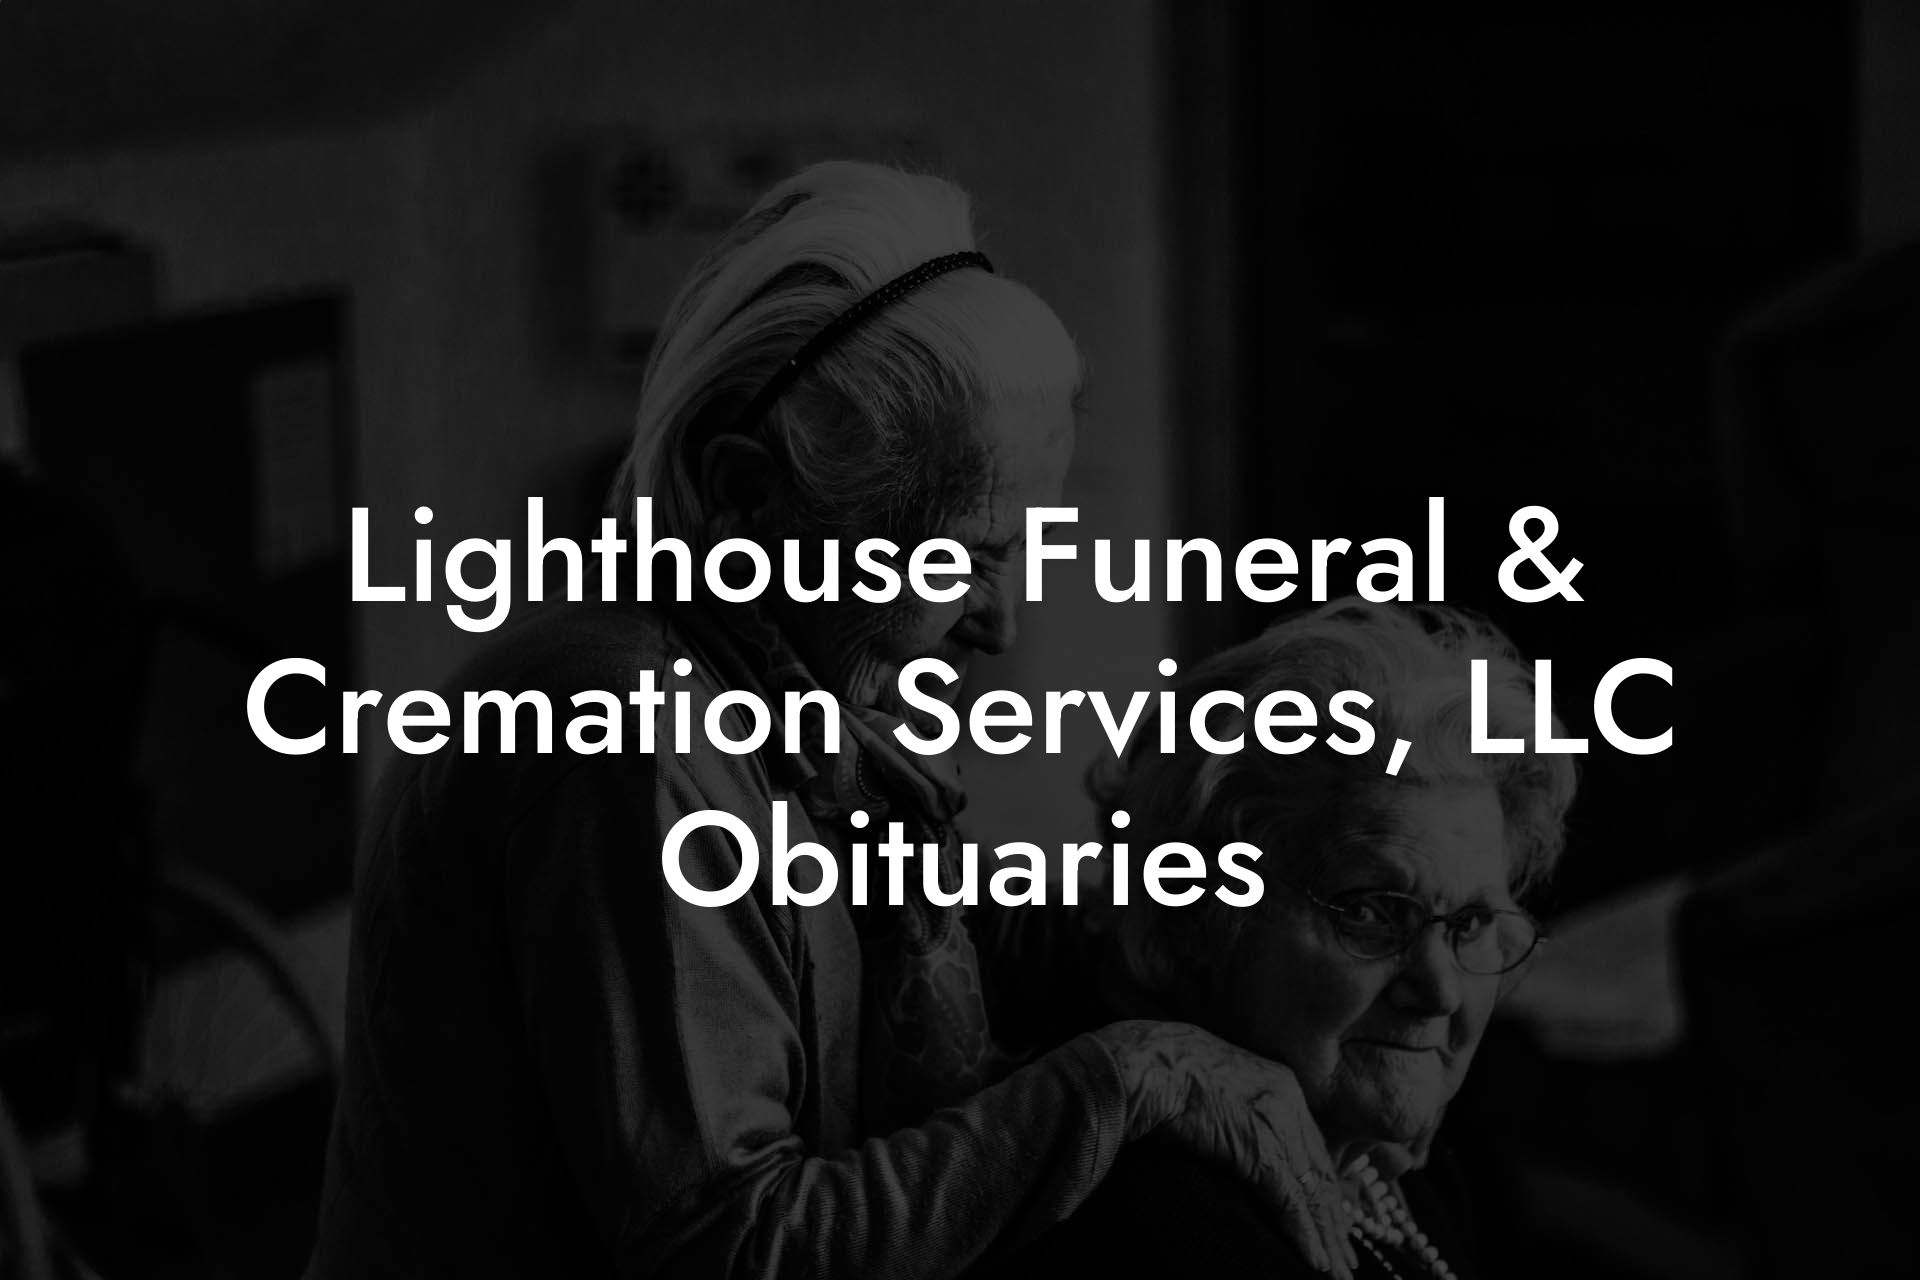 Lighthouse Funeral & Cremation Services, LLC Obituaries